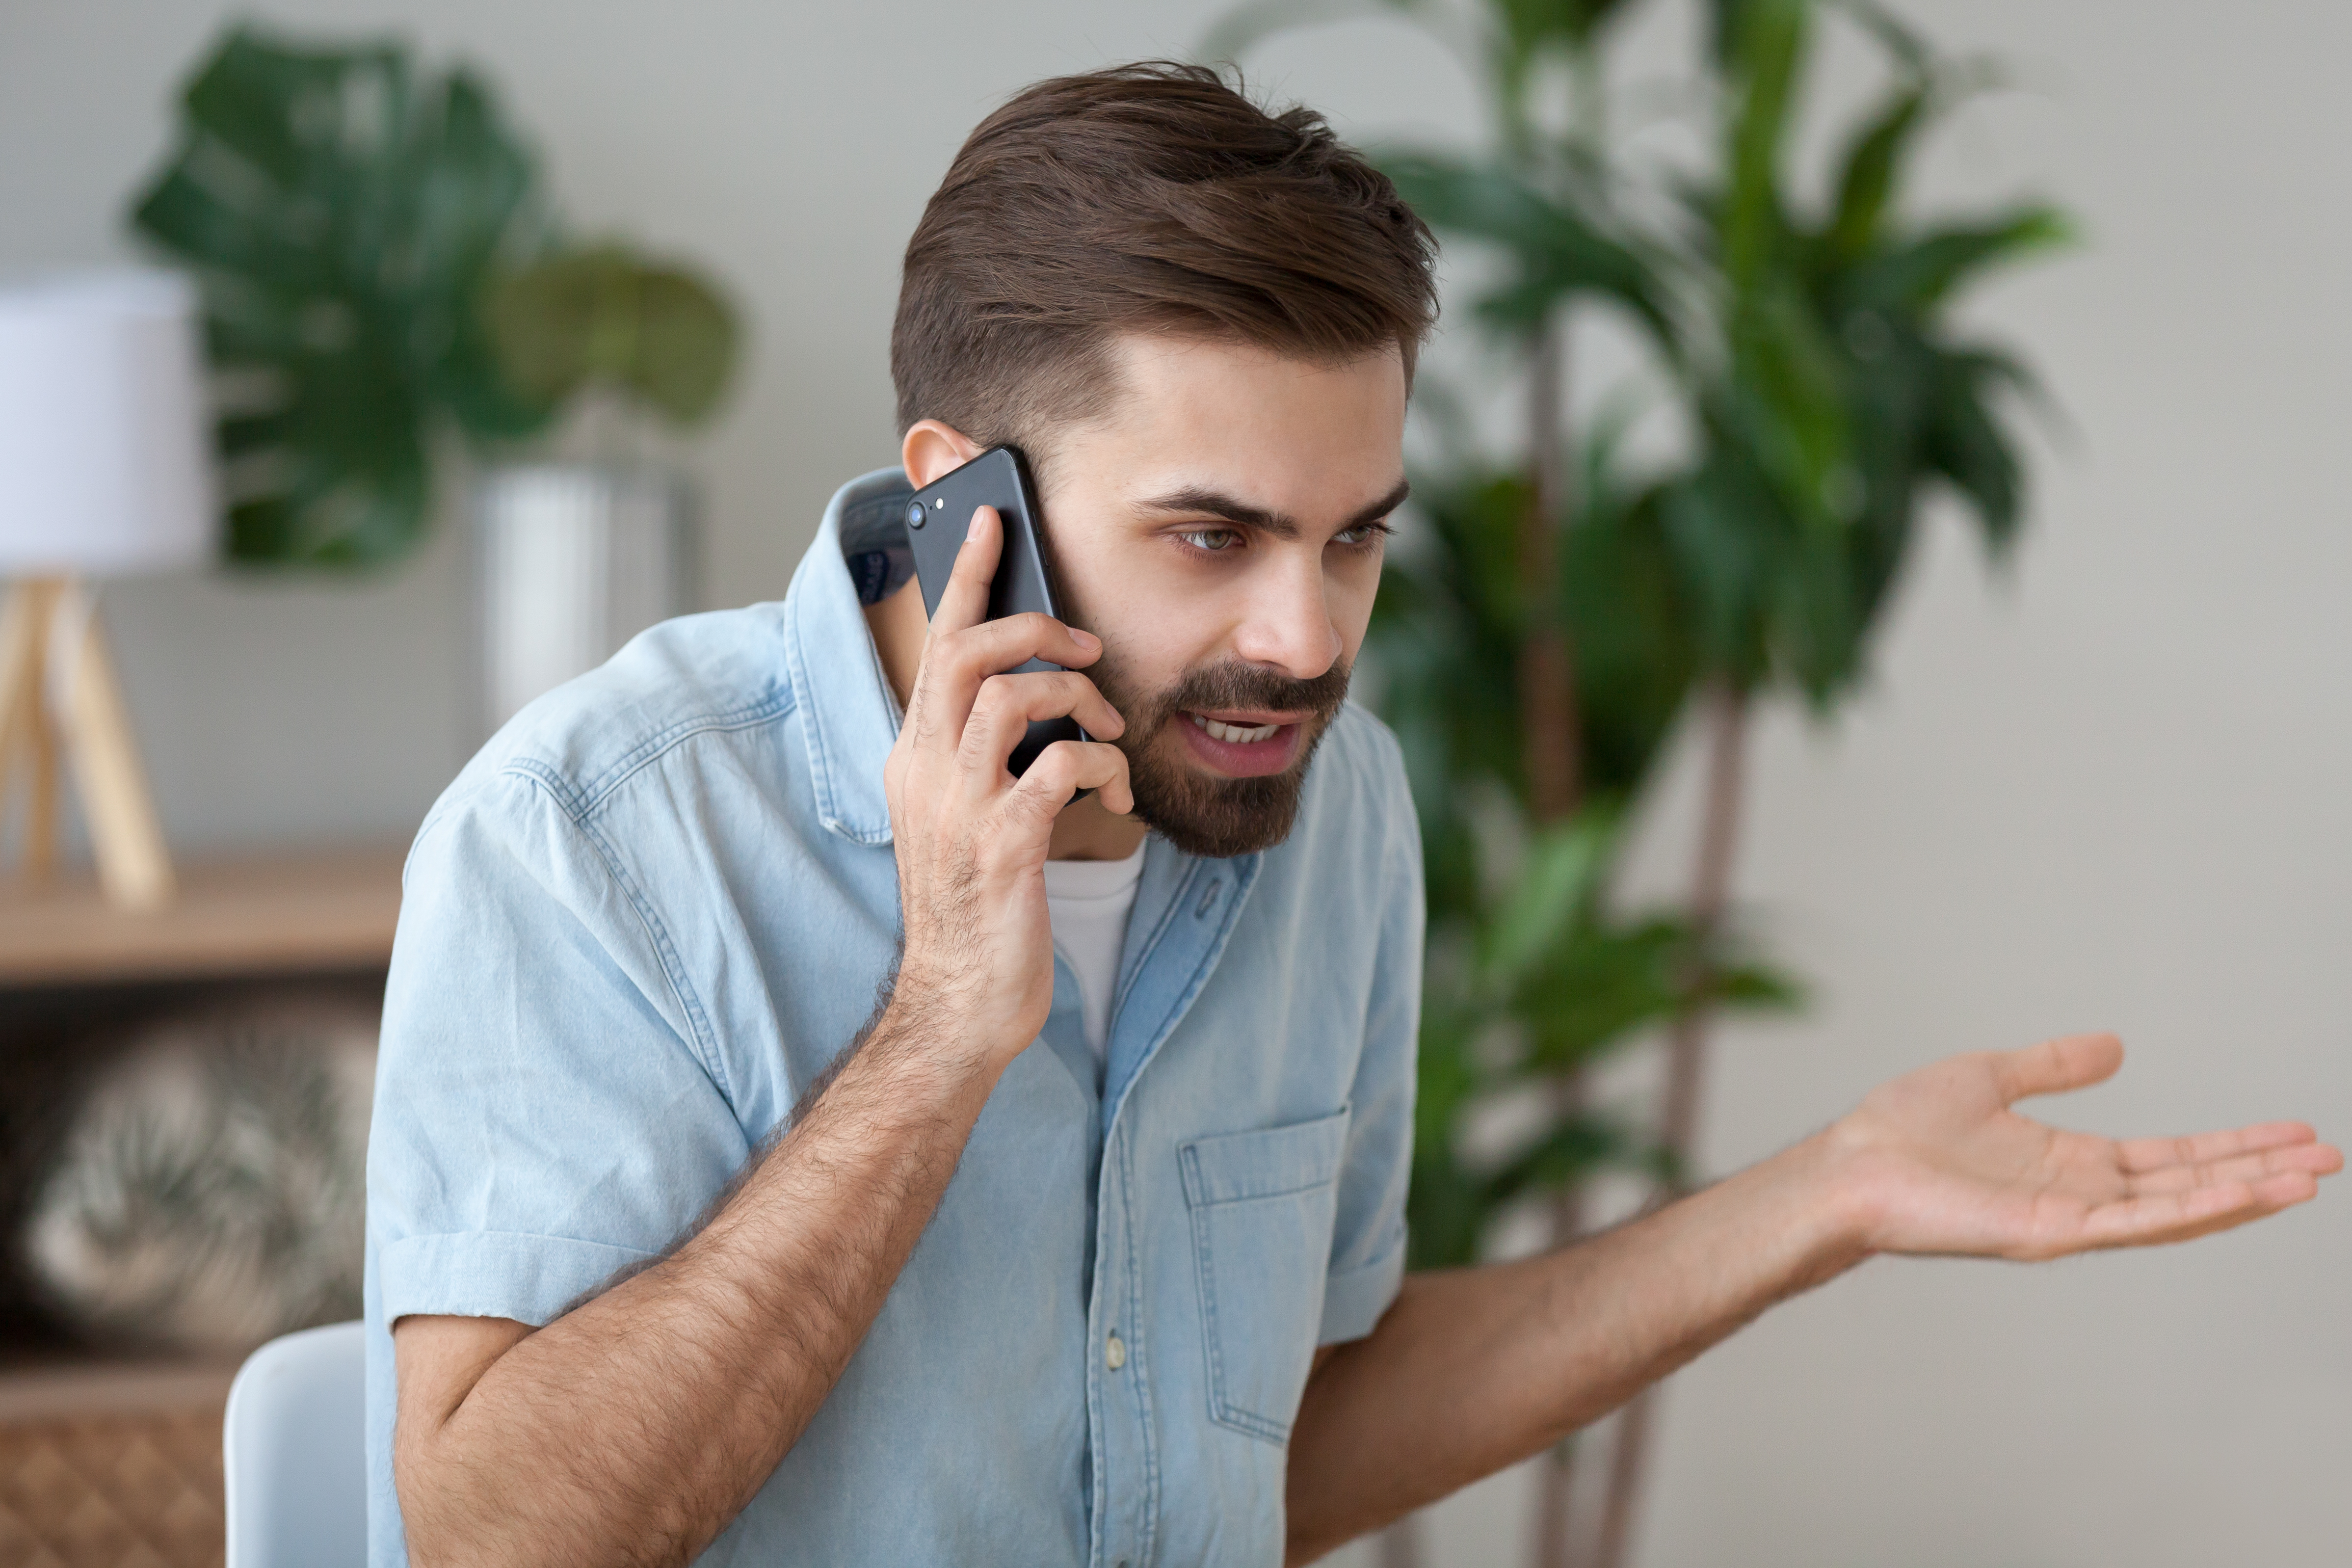 Angry man talking on the phone | Source: Shutterstock